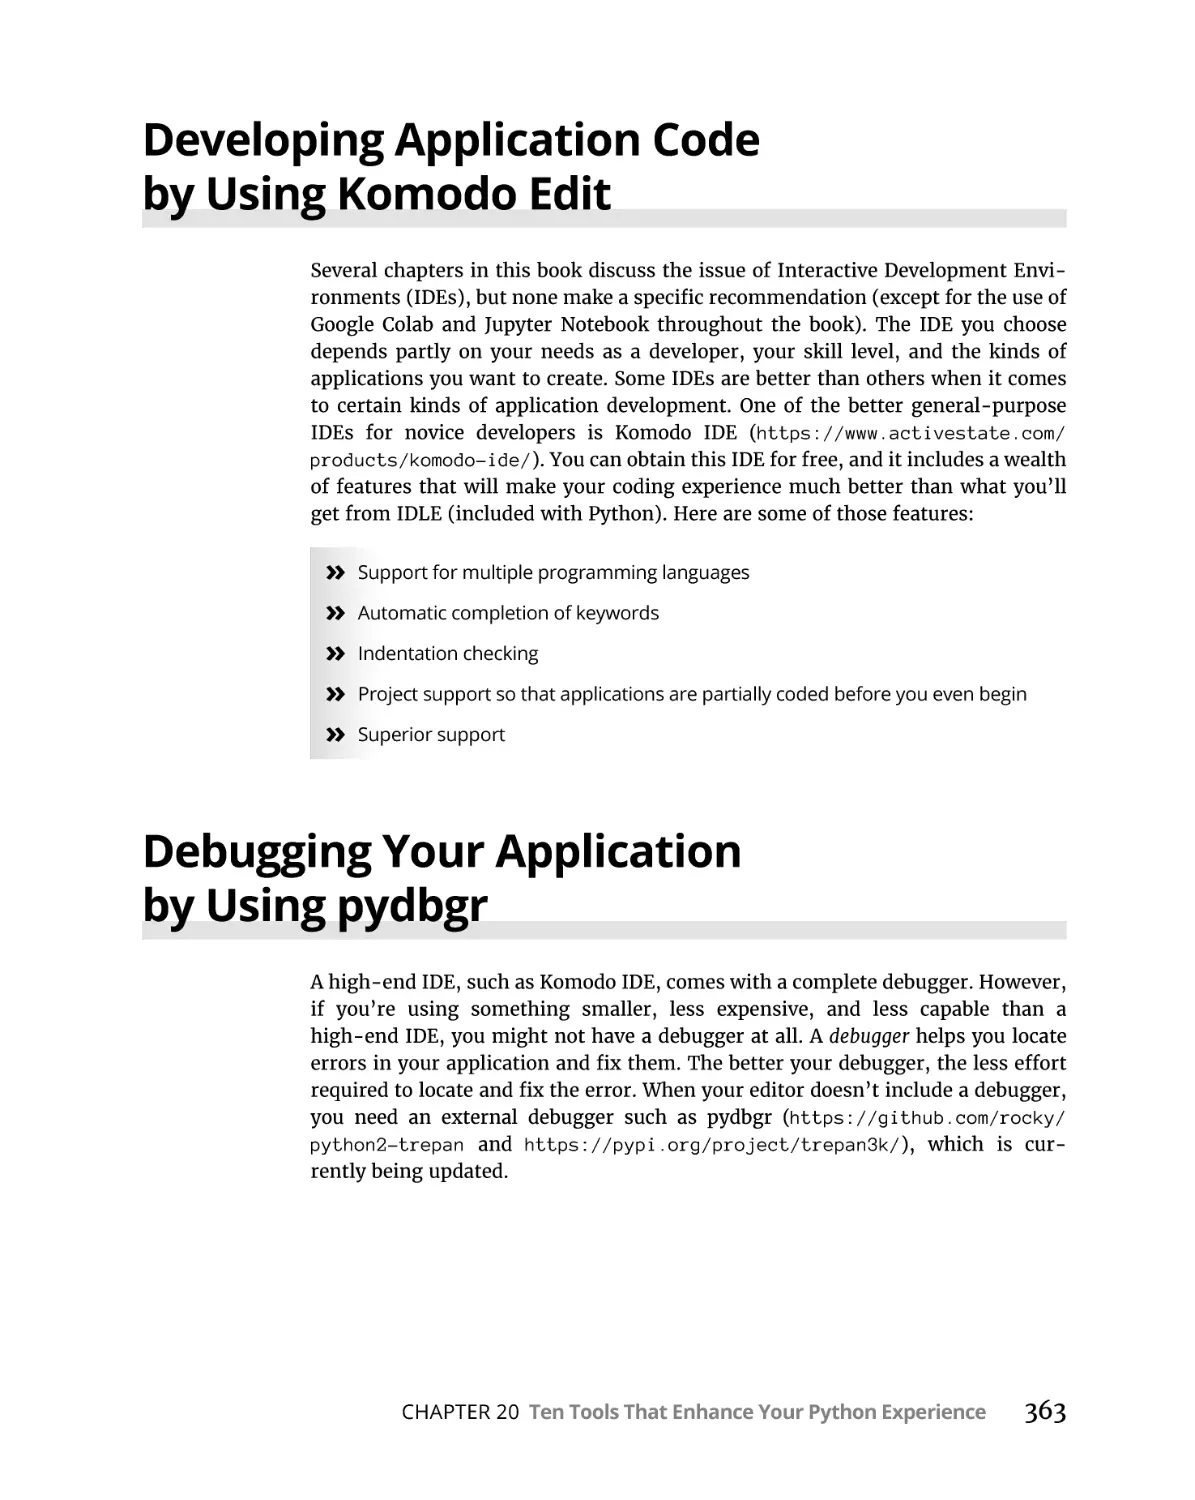 Developing Application Code by Using Komodo Edit
Debugging Your Application by Using pydbgr